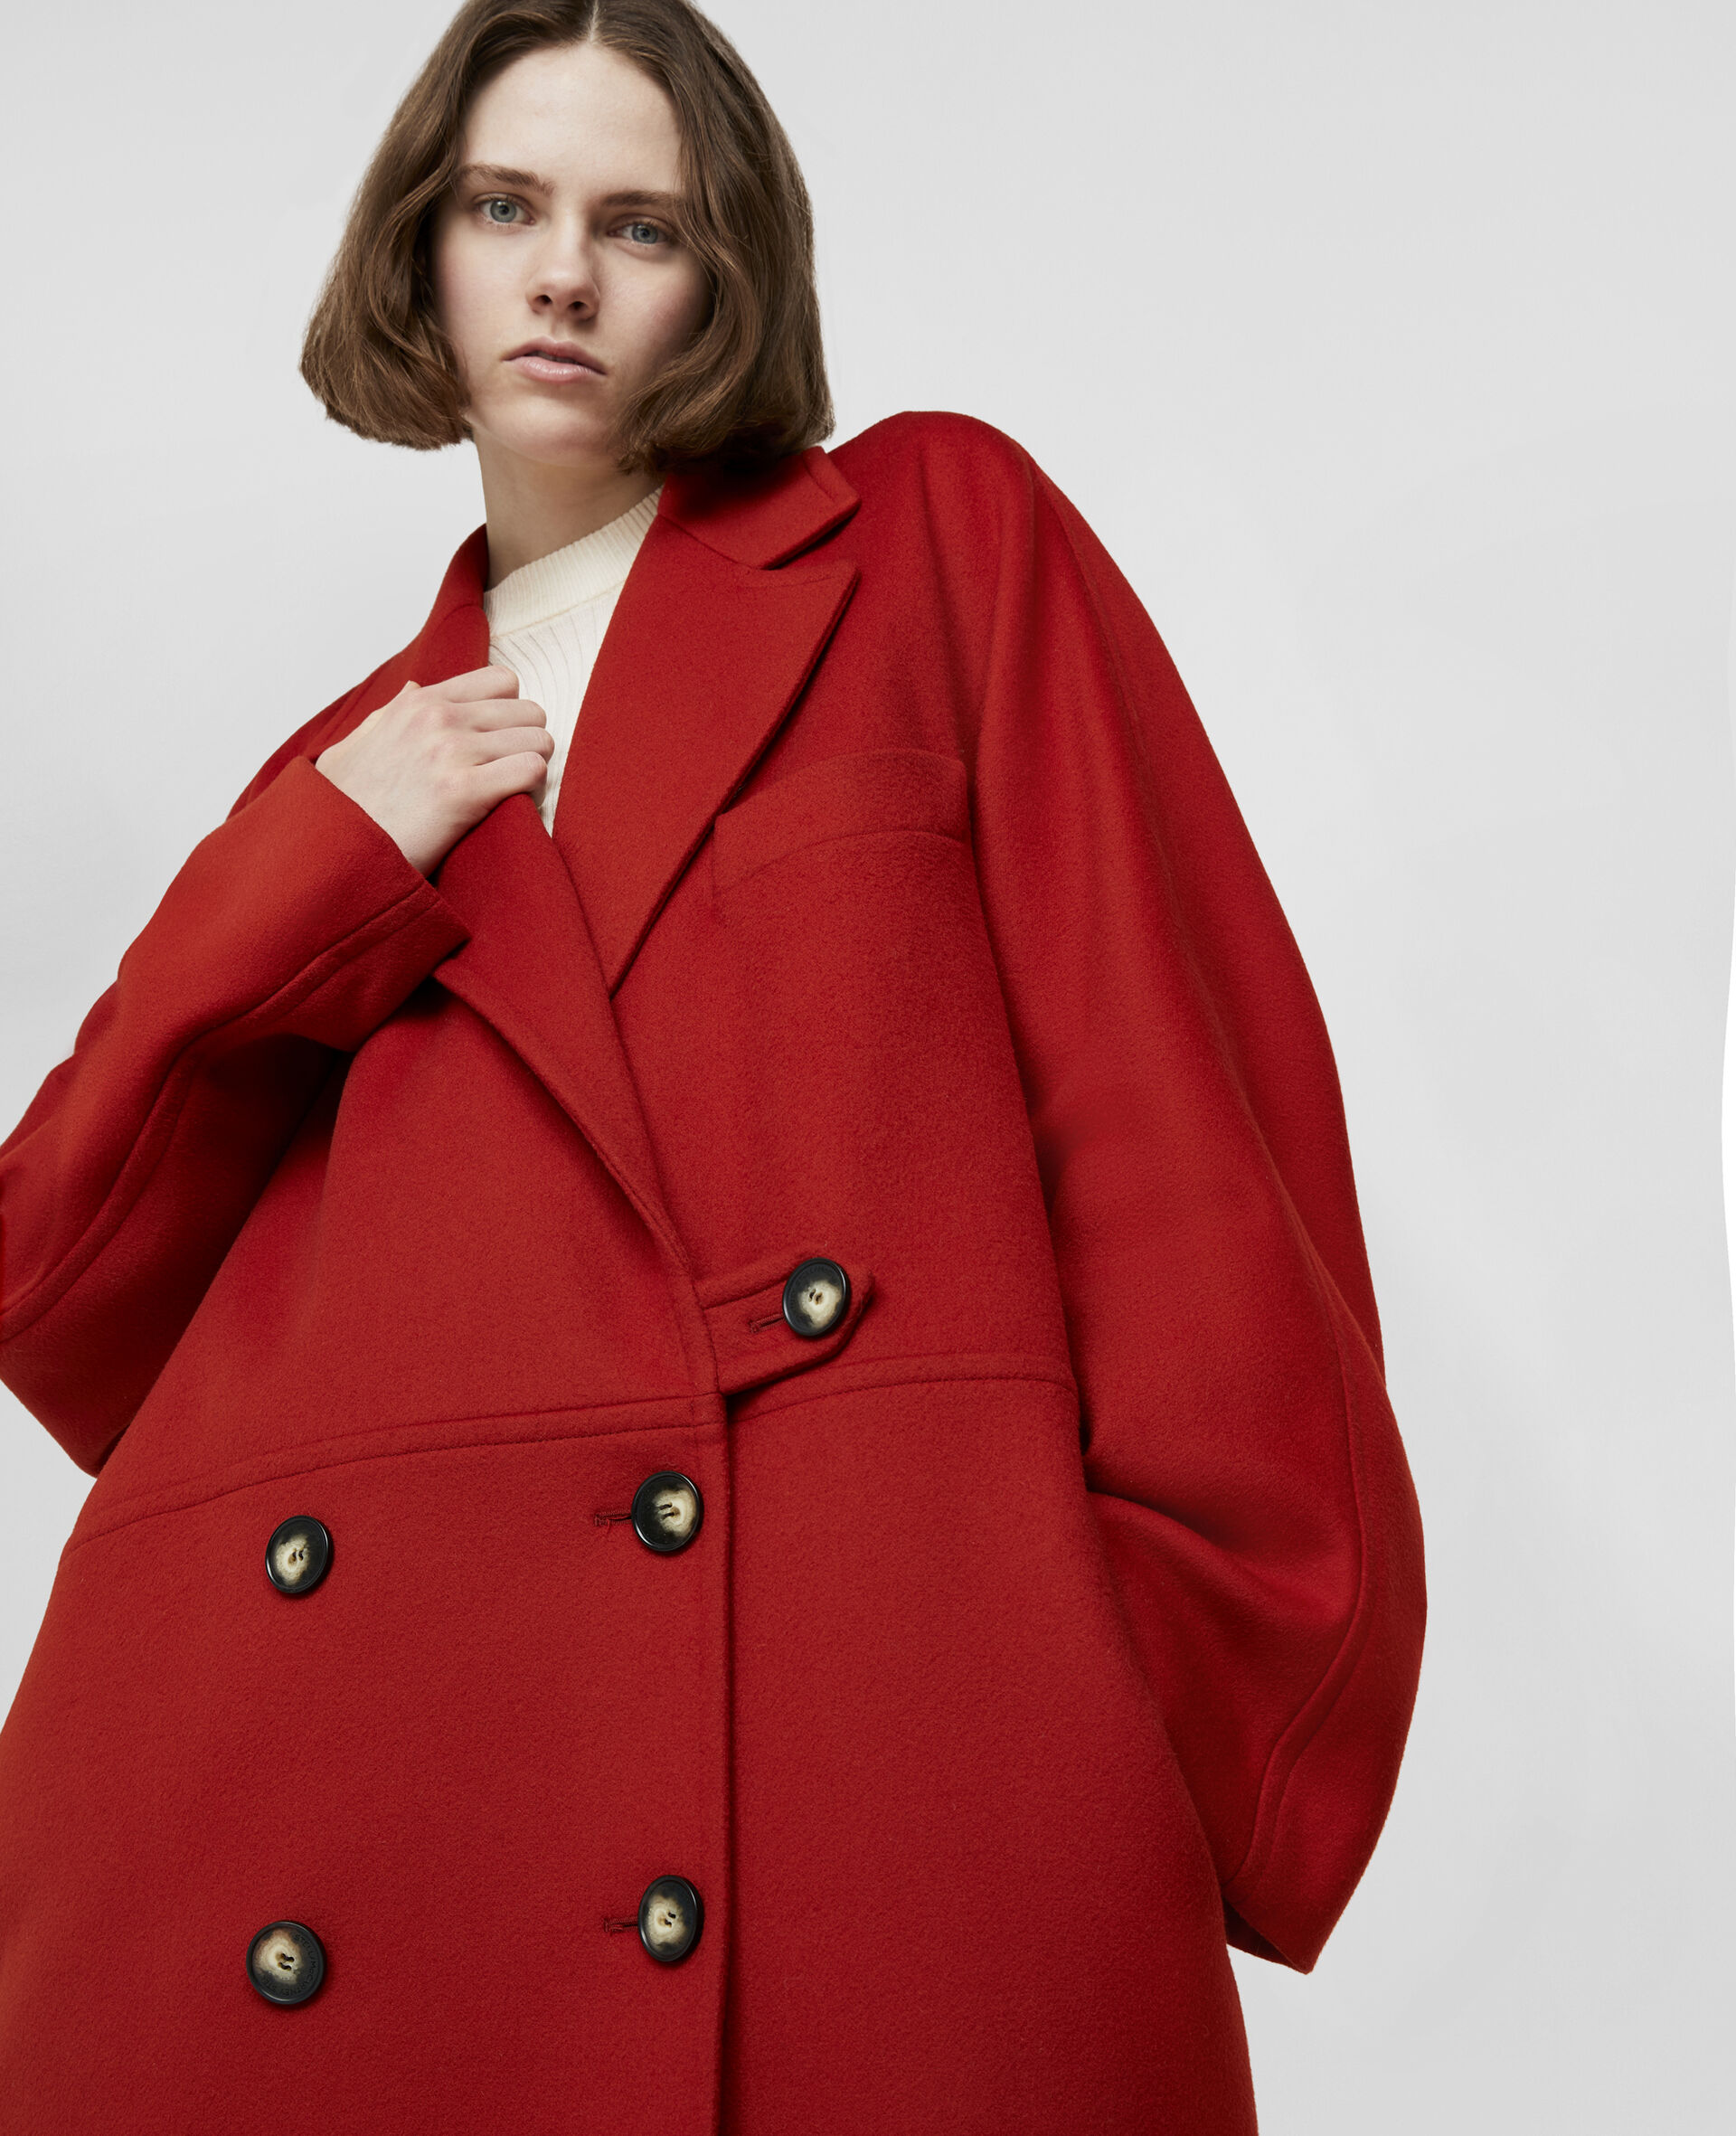 Wool Coat-Red-large image number 3